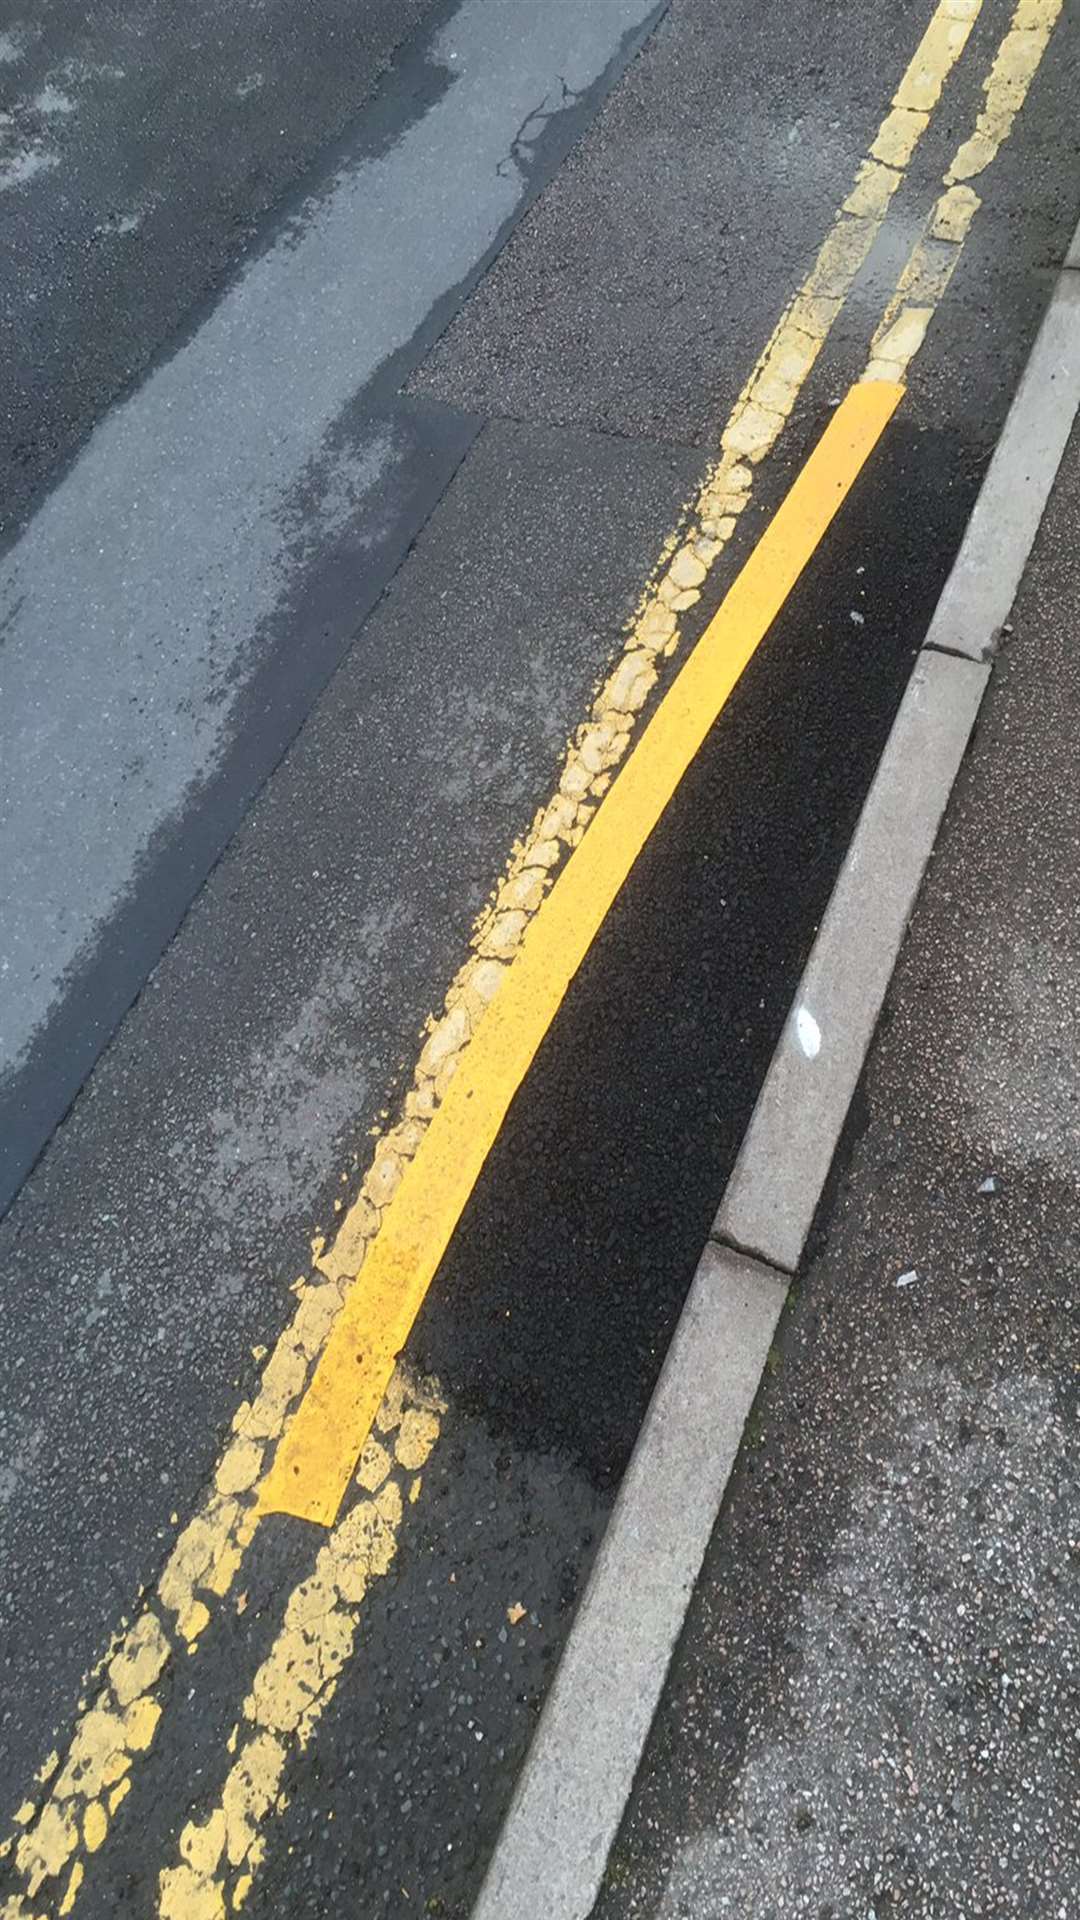 The yellow lines last week. Picture: @ChrisKemsley